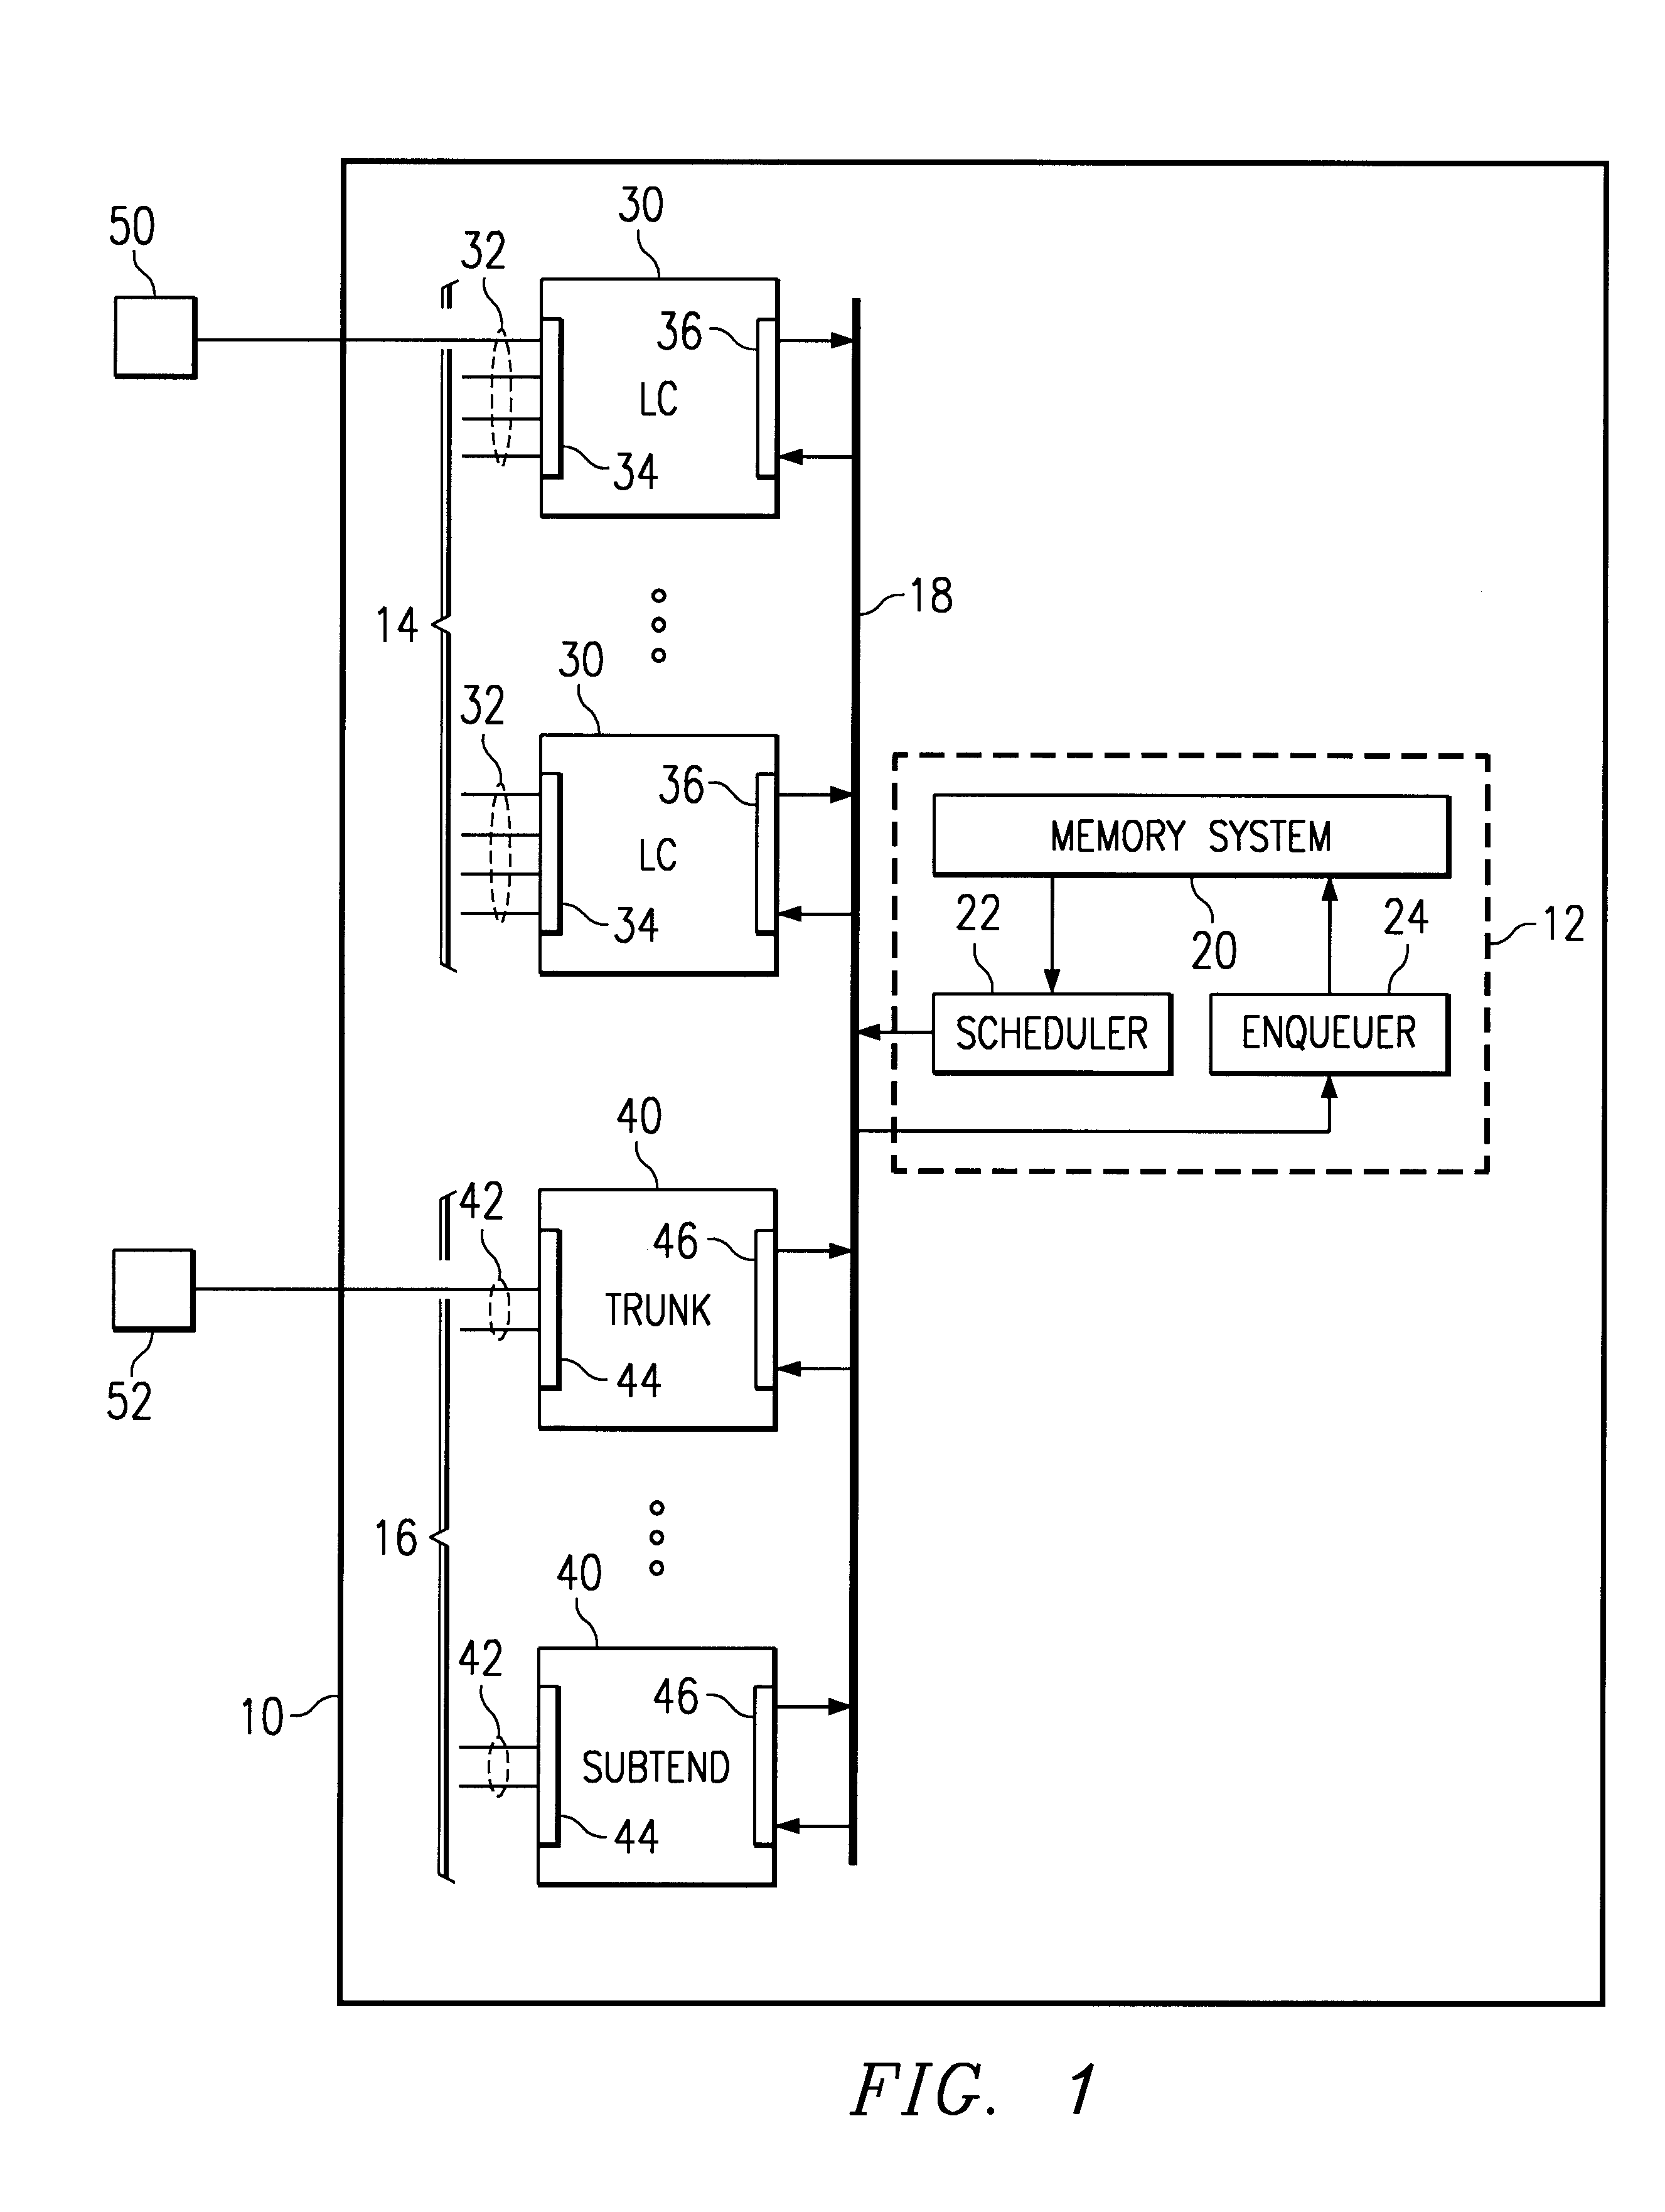 Interleaved read/write operation in a data switch